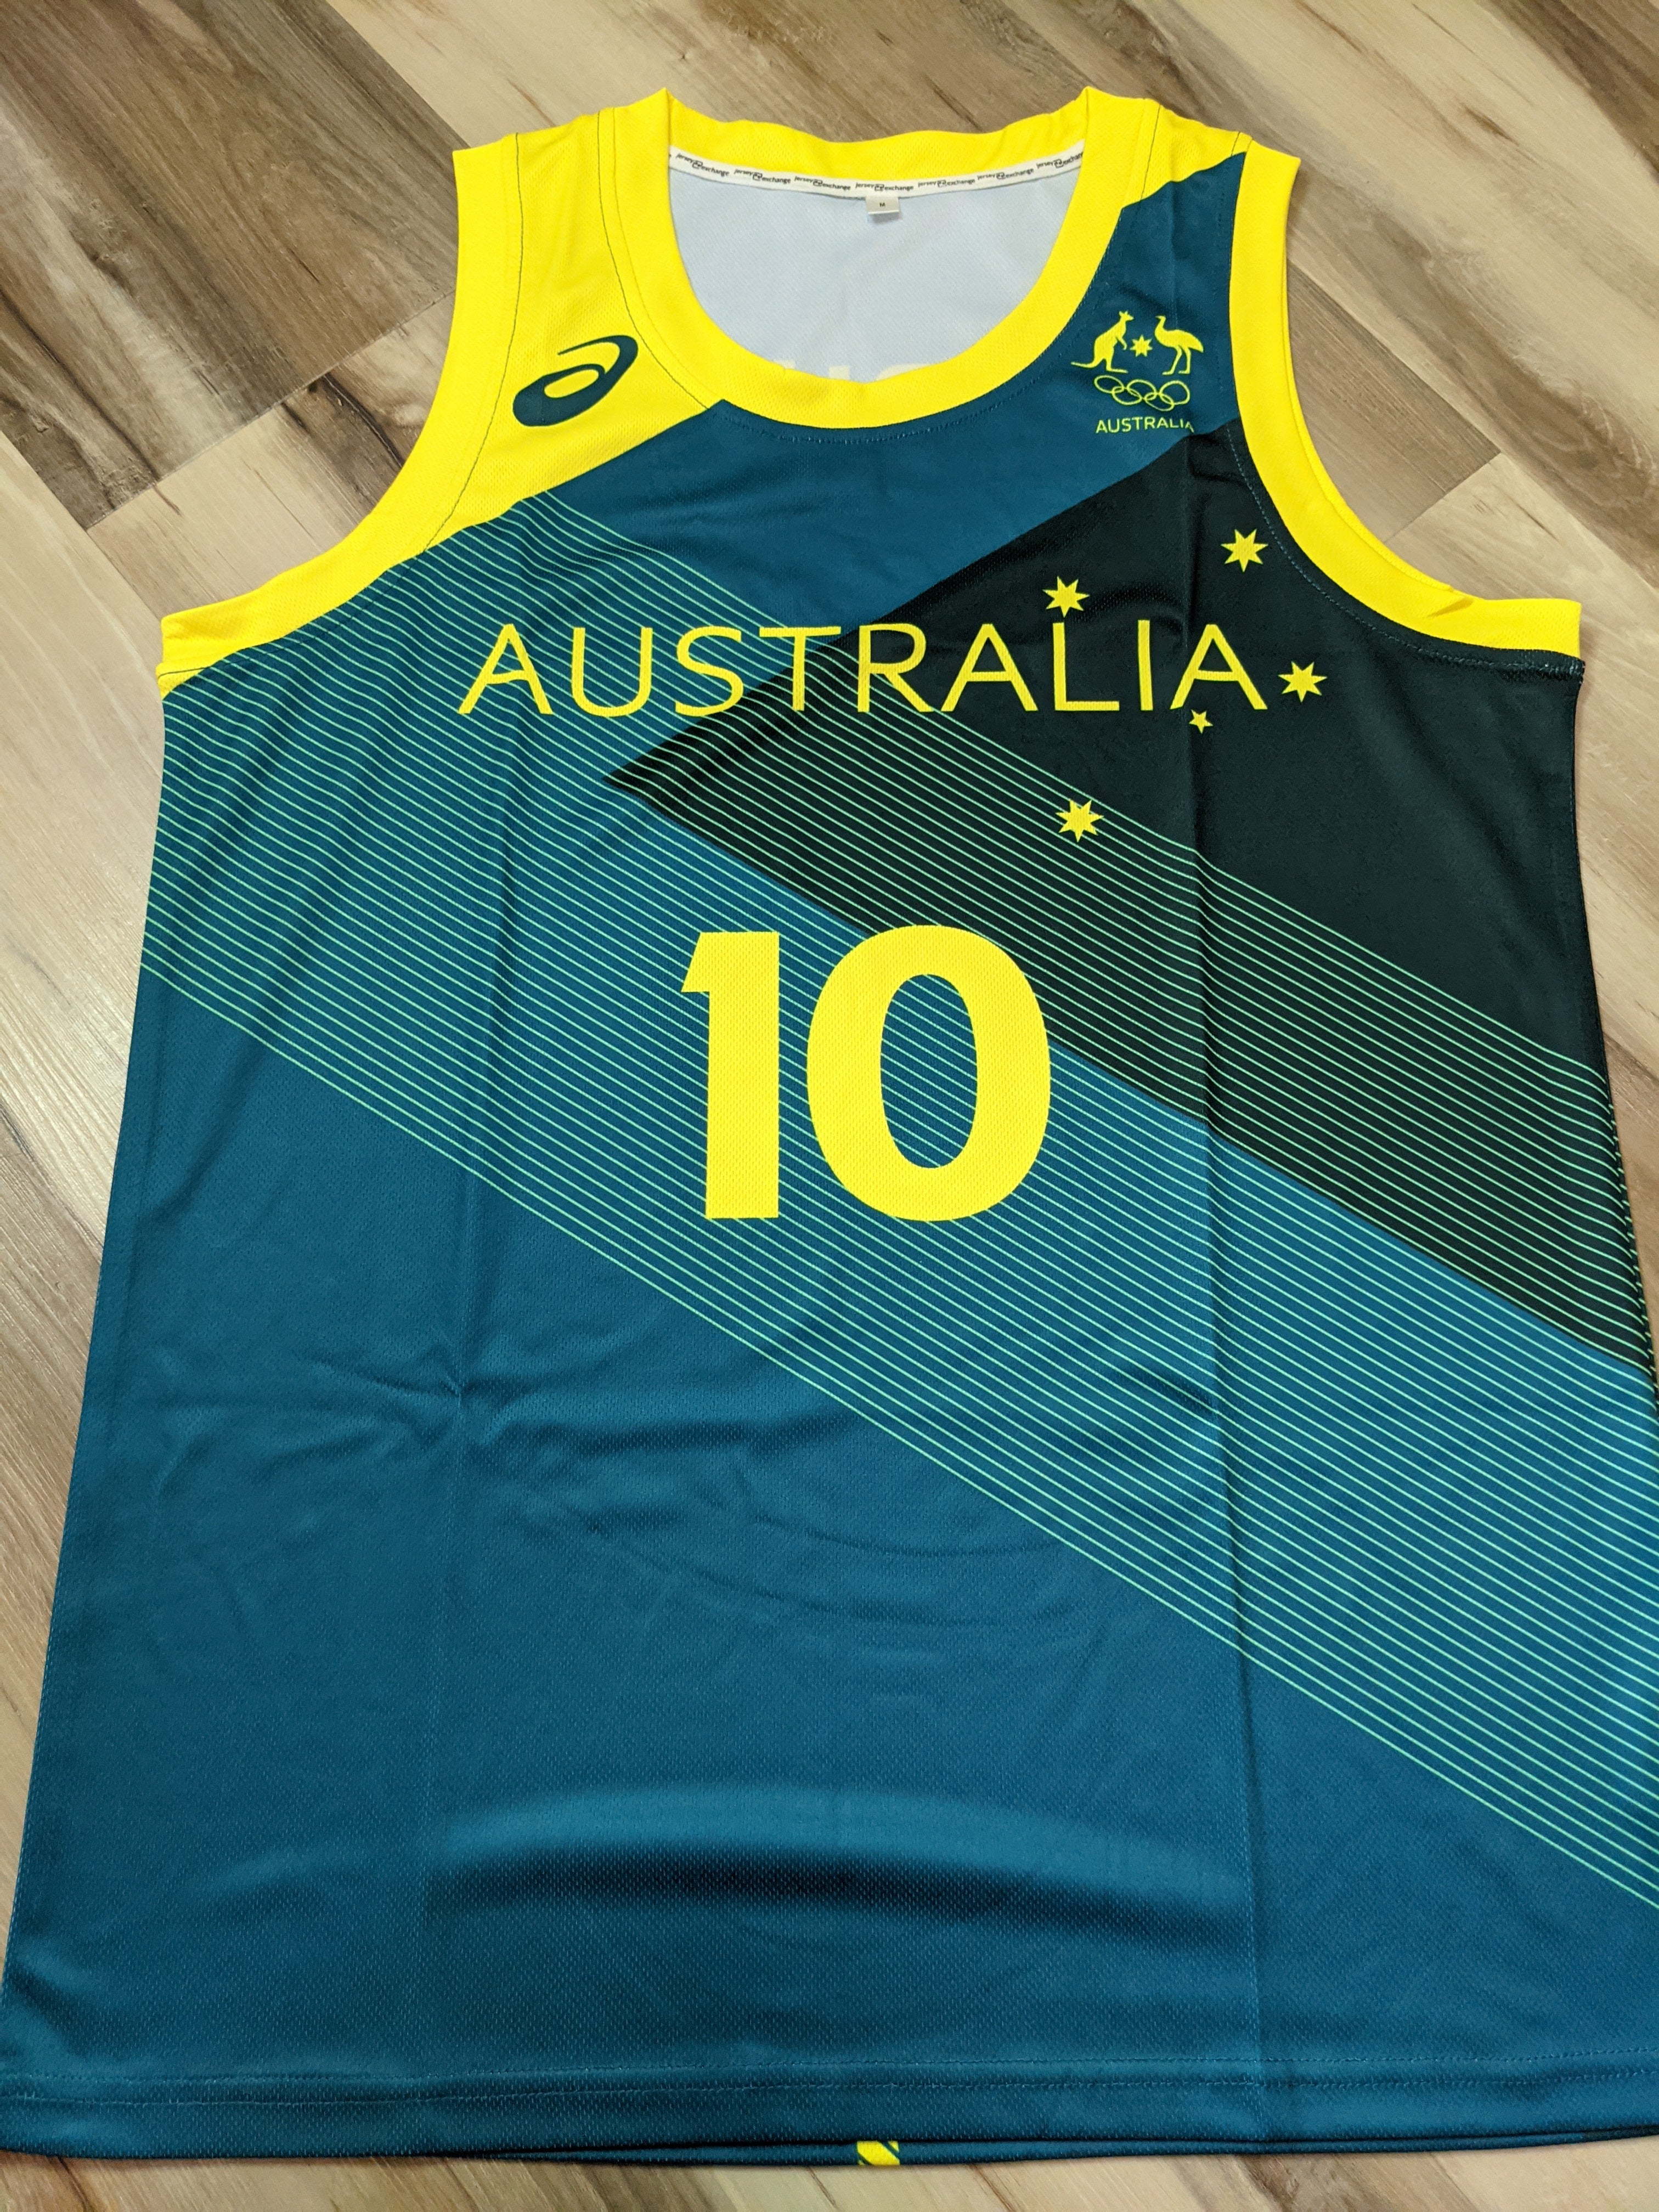 A jersey design concept for the Australia Boomers basketball team.